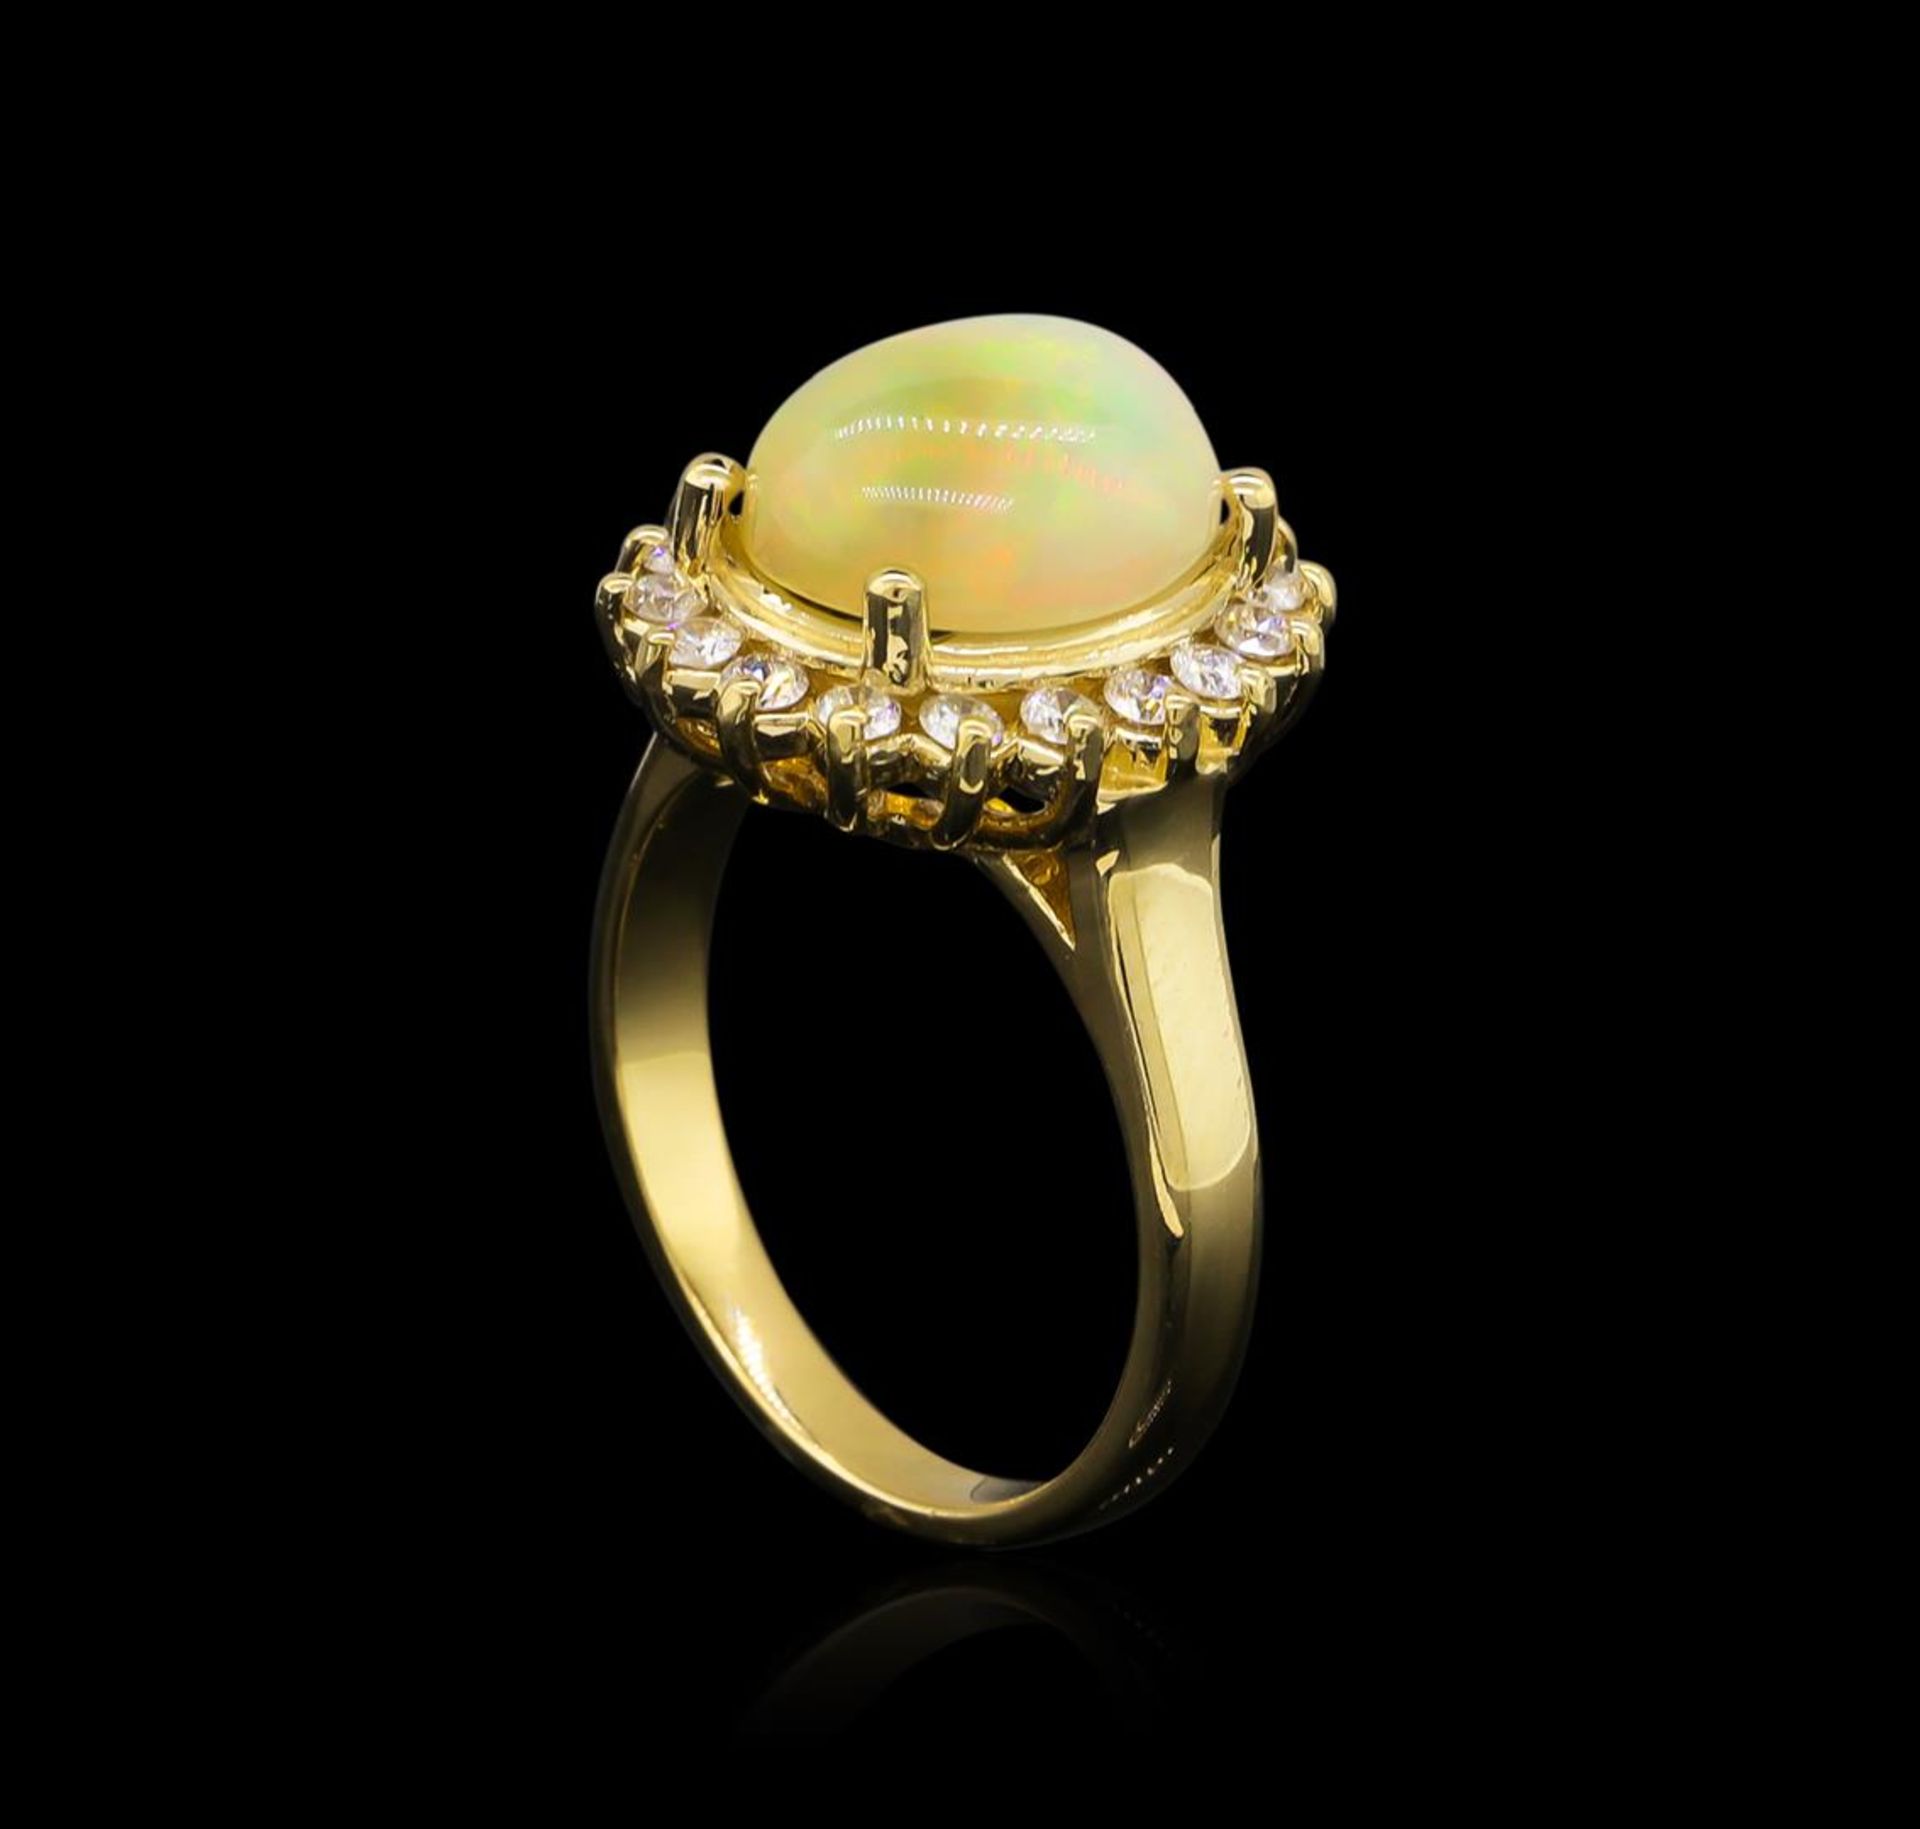 2.48 ctw Opal and Diamond Ring - 14KT Yellow Gold - Image 4 of 4